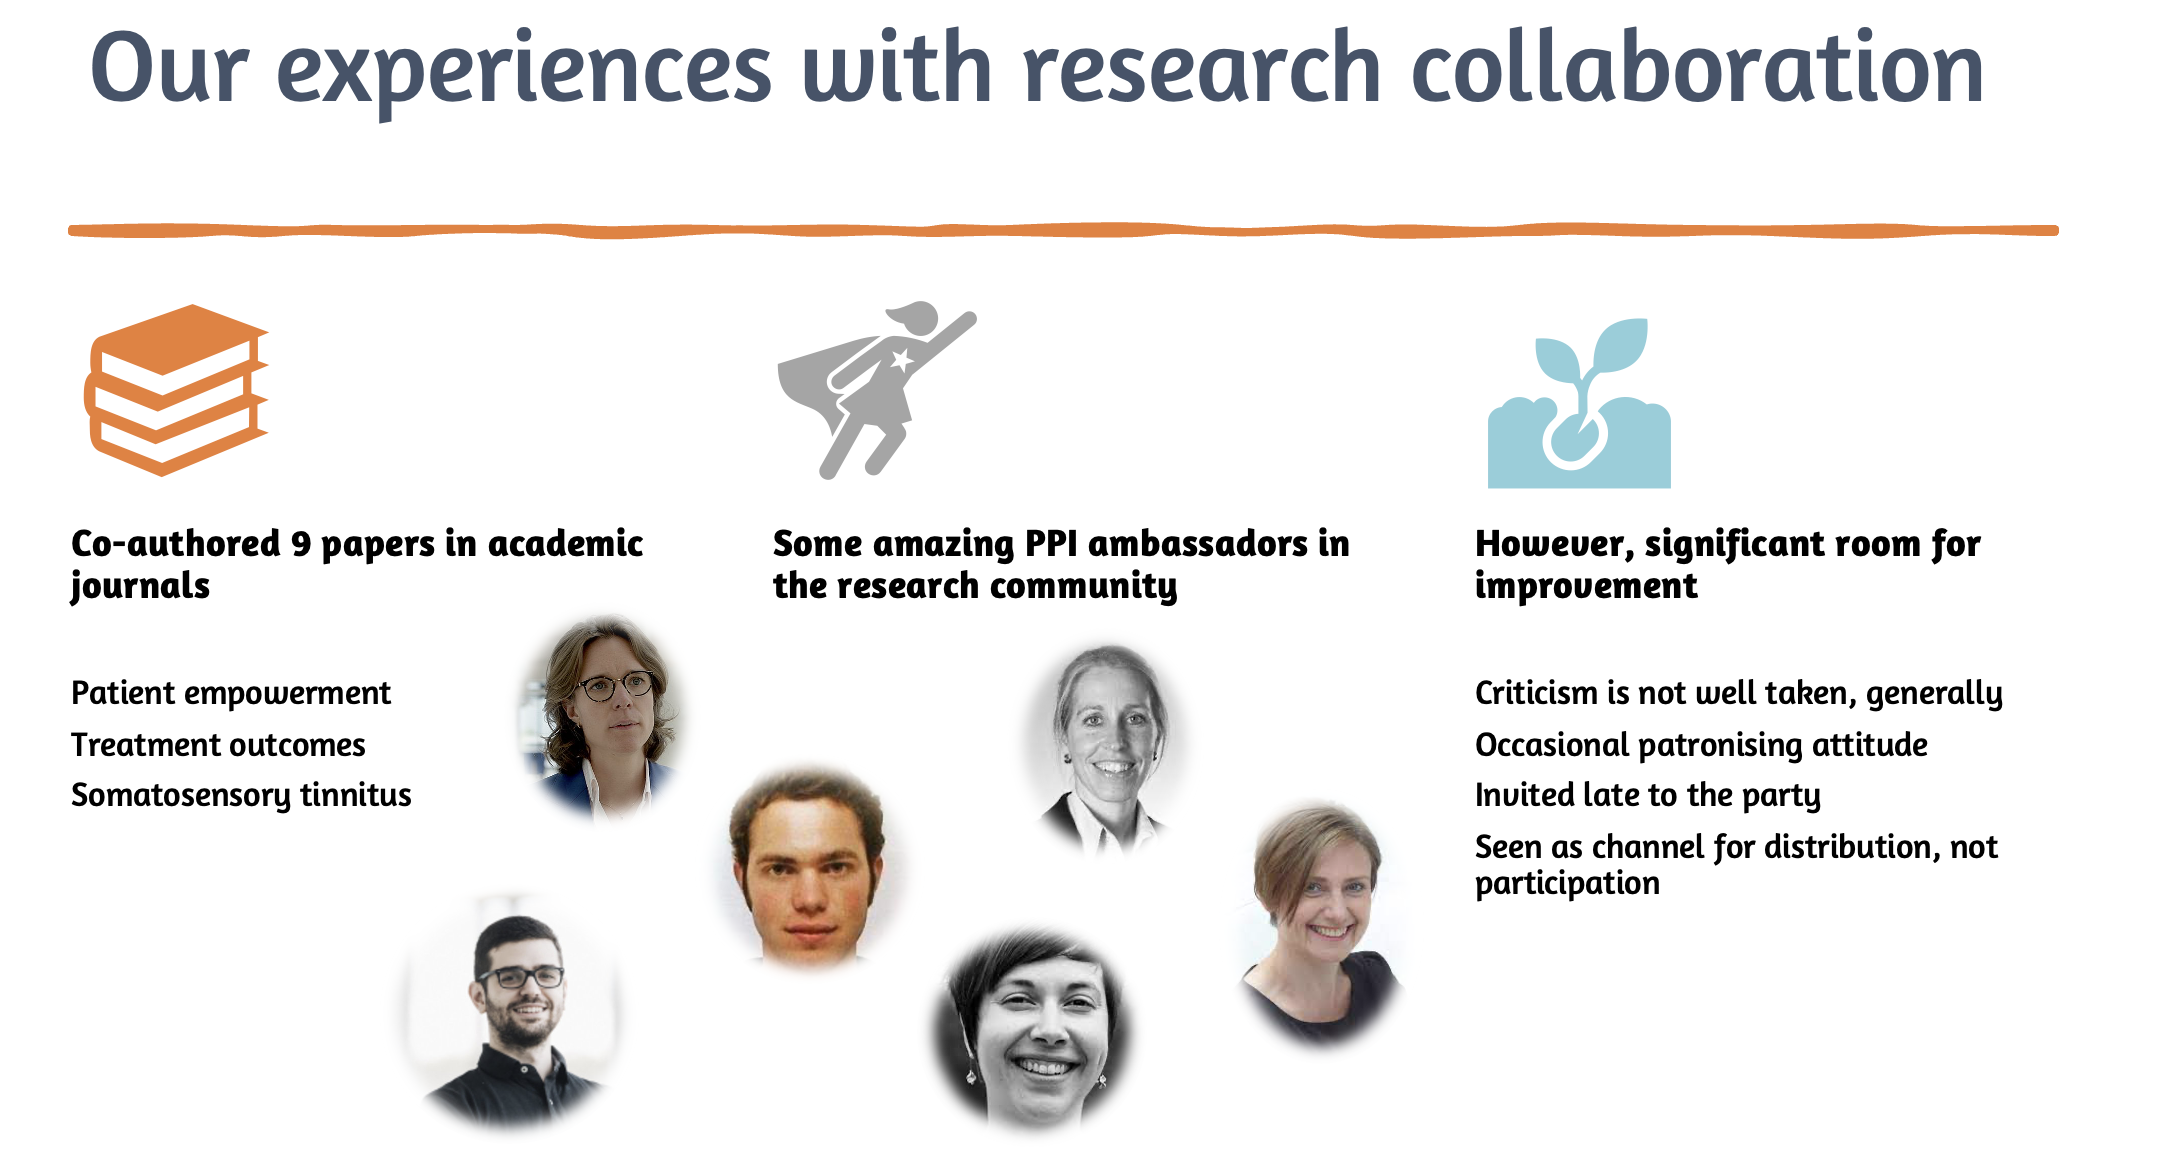 Tinnitus Hub's experience with research collaboration